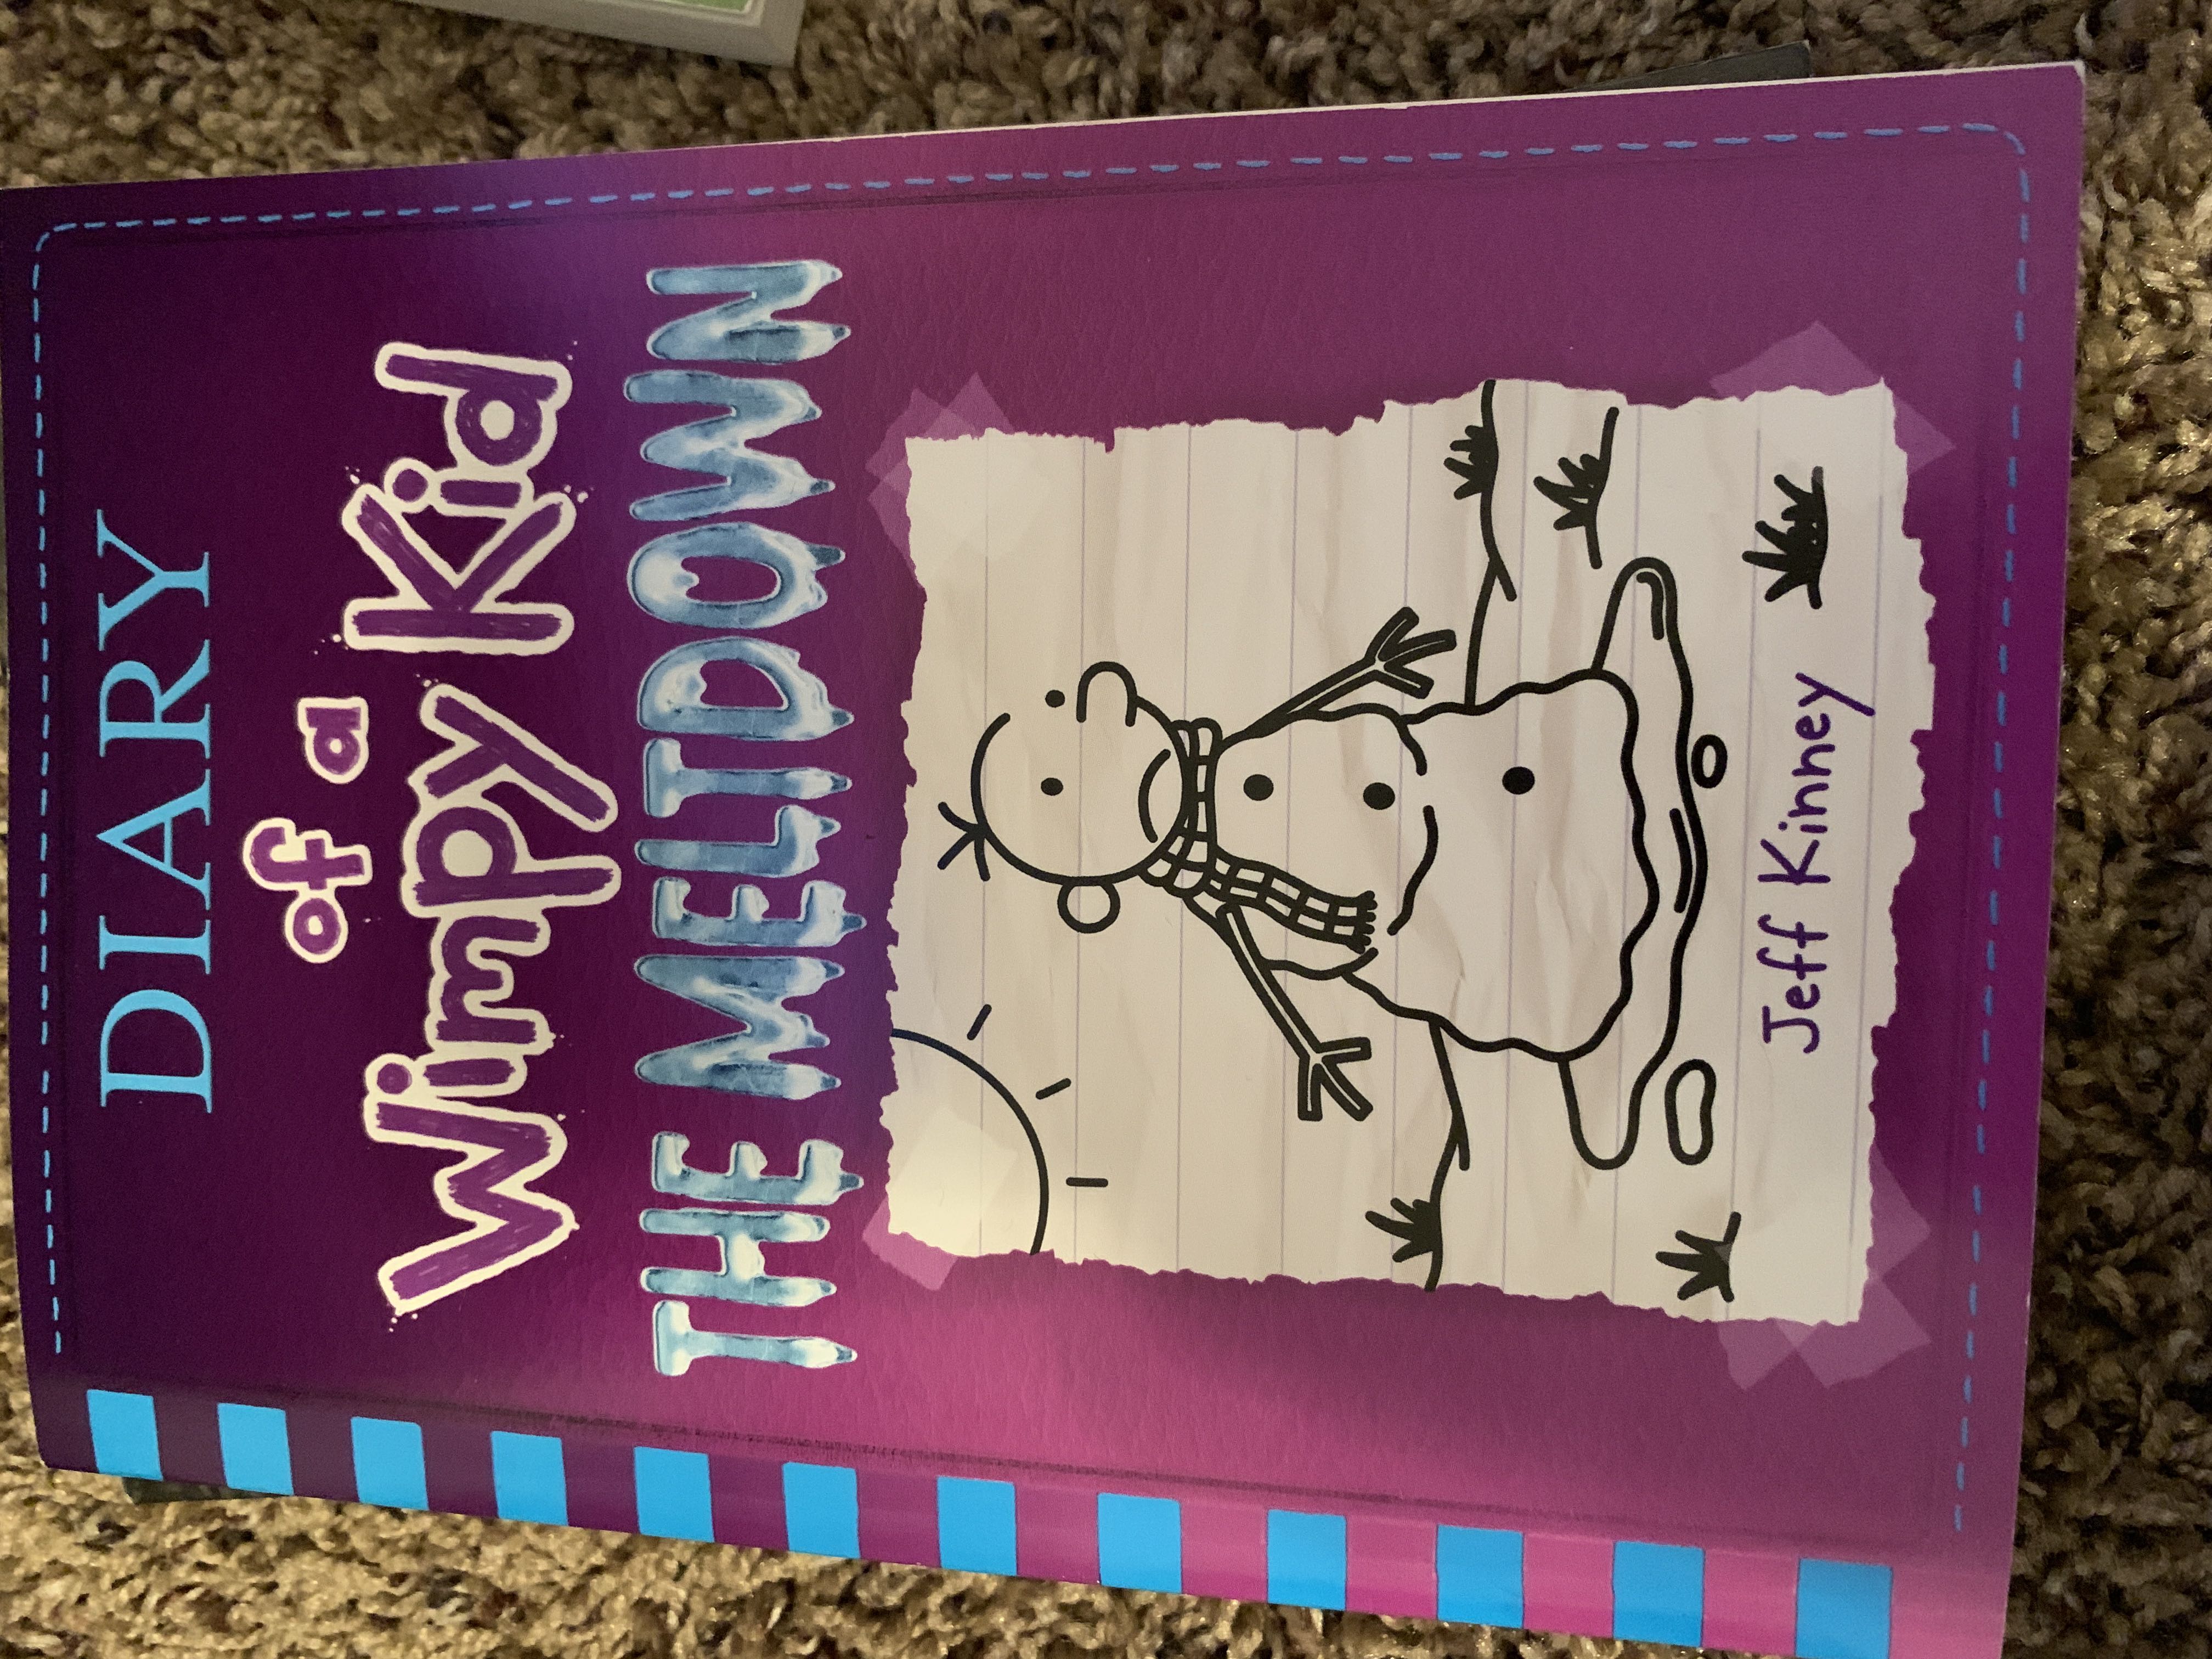 Diary Of A Wimpy Kid #13: The Meltdown - Jeff Kinney (Amulet - Paperback) book collectible [Barcode 9781419736421] - Main Image 1